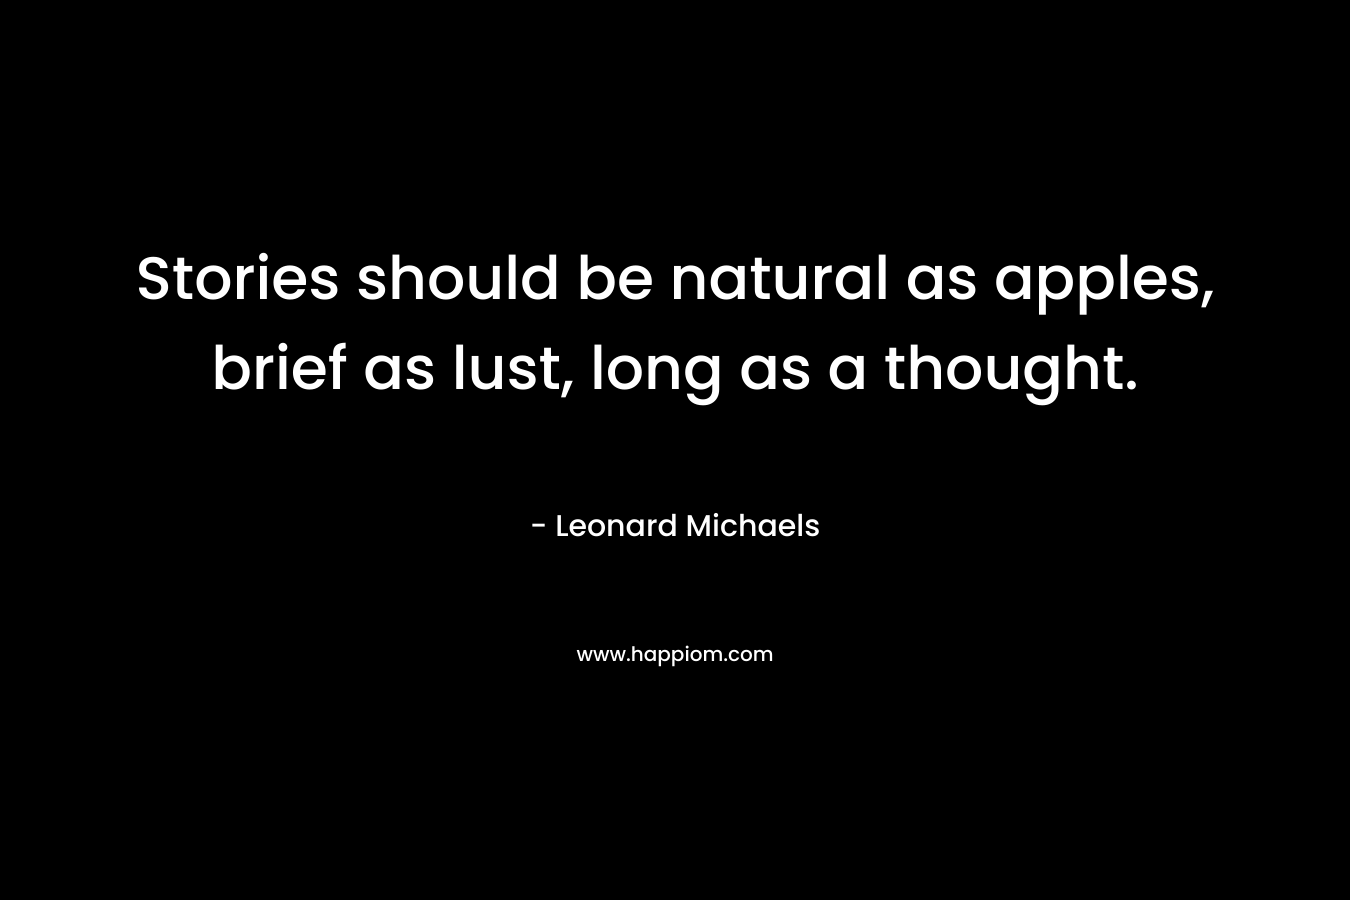 Stories should be natural as apples, brief as lust, long as a thought. – Leonard Michaels